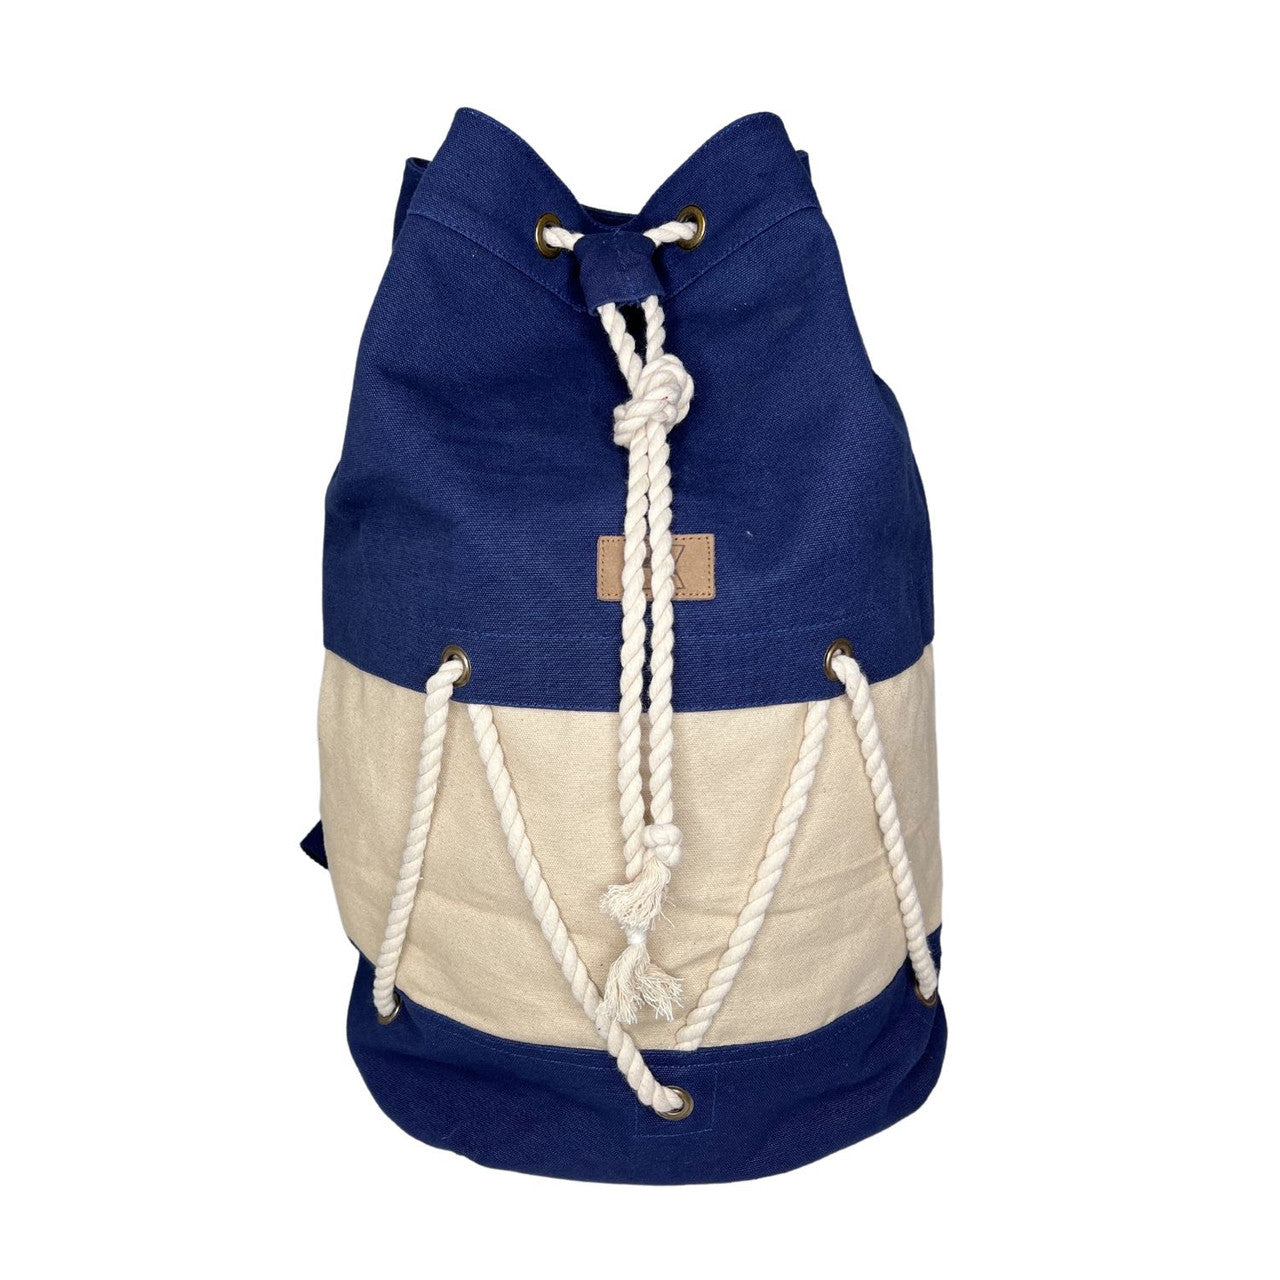 Canvas Drawstring Sailor Backpack with Rope Detail